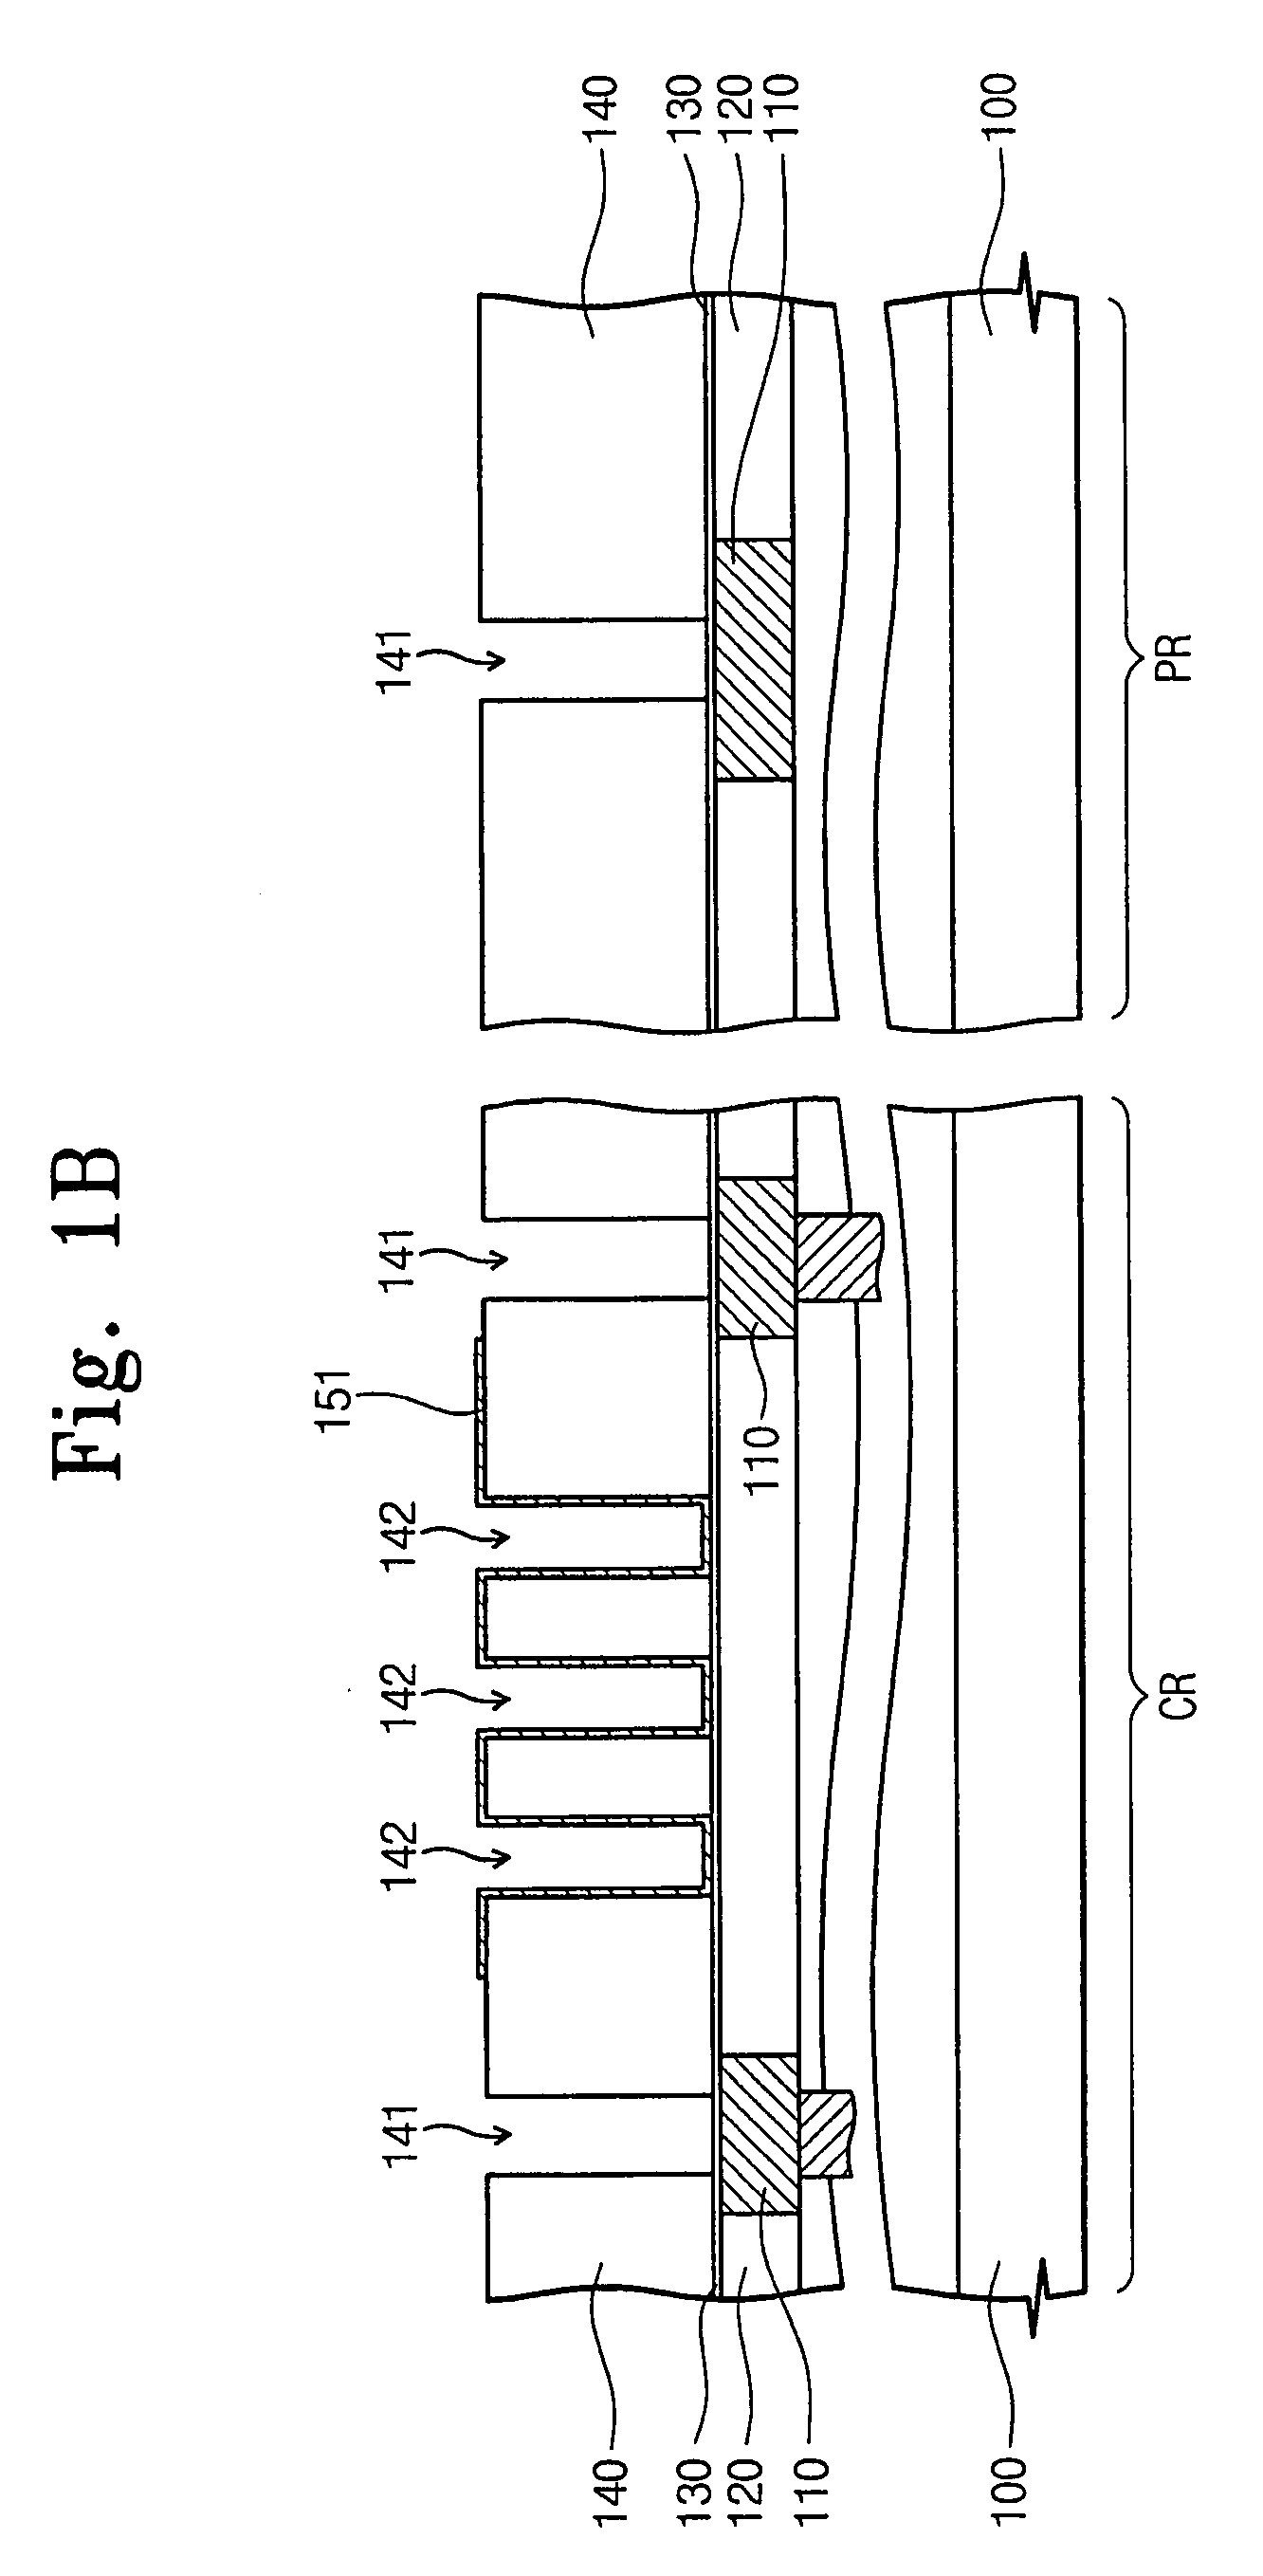 Capacitor structure of semiconductor device and method of fabricating the same